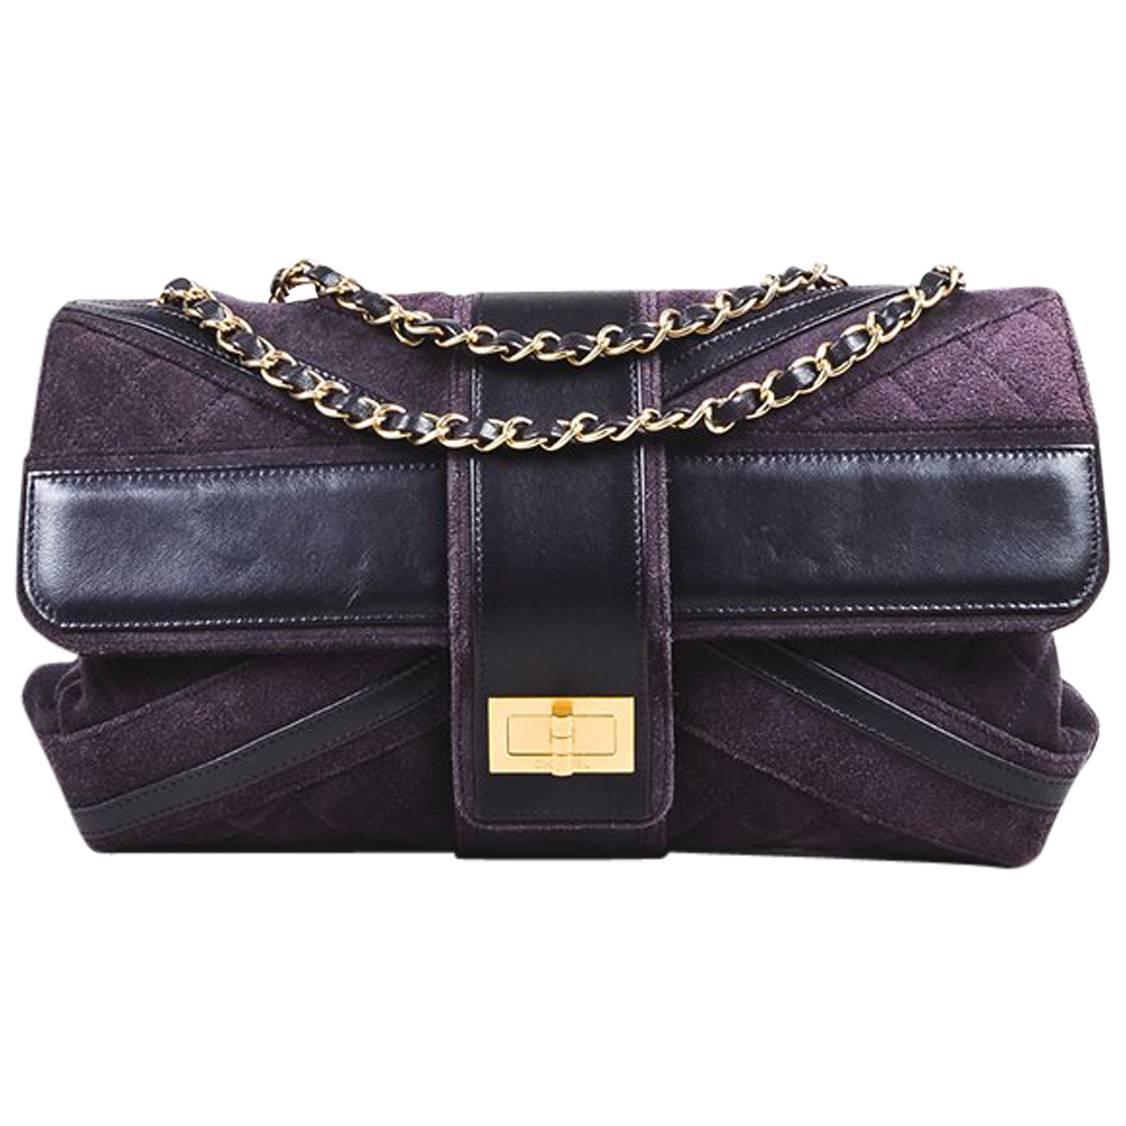 Chanel Purple Suede Leather Quilted Paneled "Union Jack" Mademoiselle Flap Bag For Sale